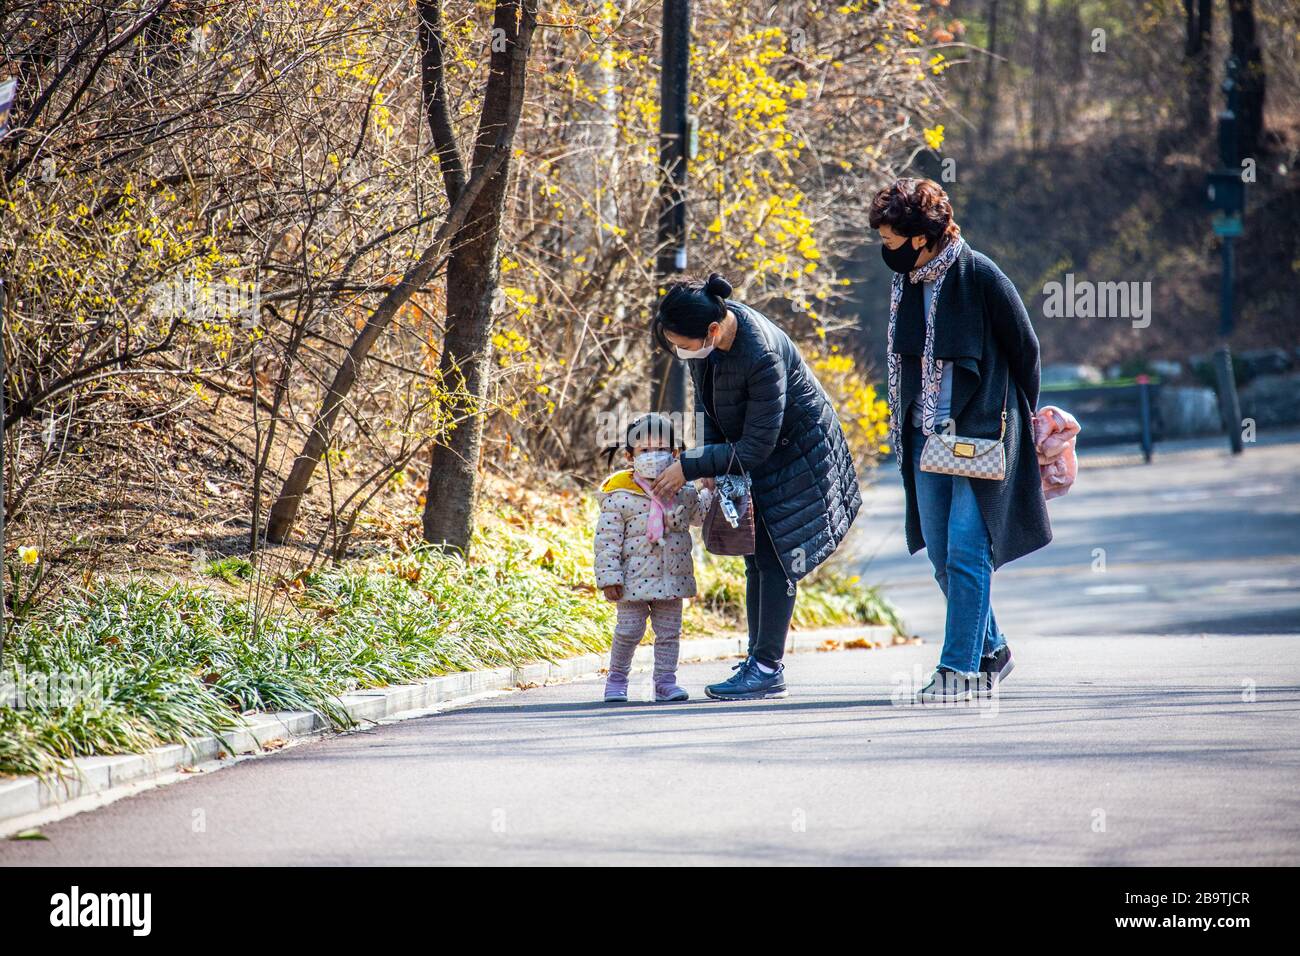 Young girl and parents wearing facemasks during the Coronavirus pandemic, Seoul, South Korea Stock Photo